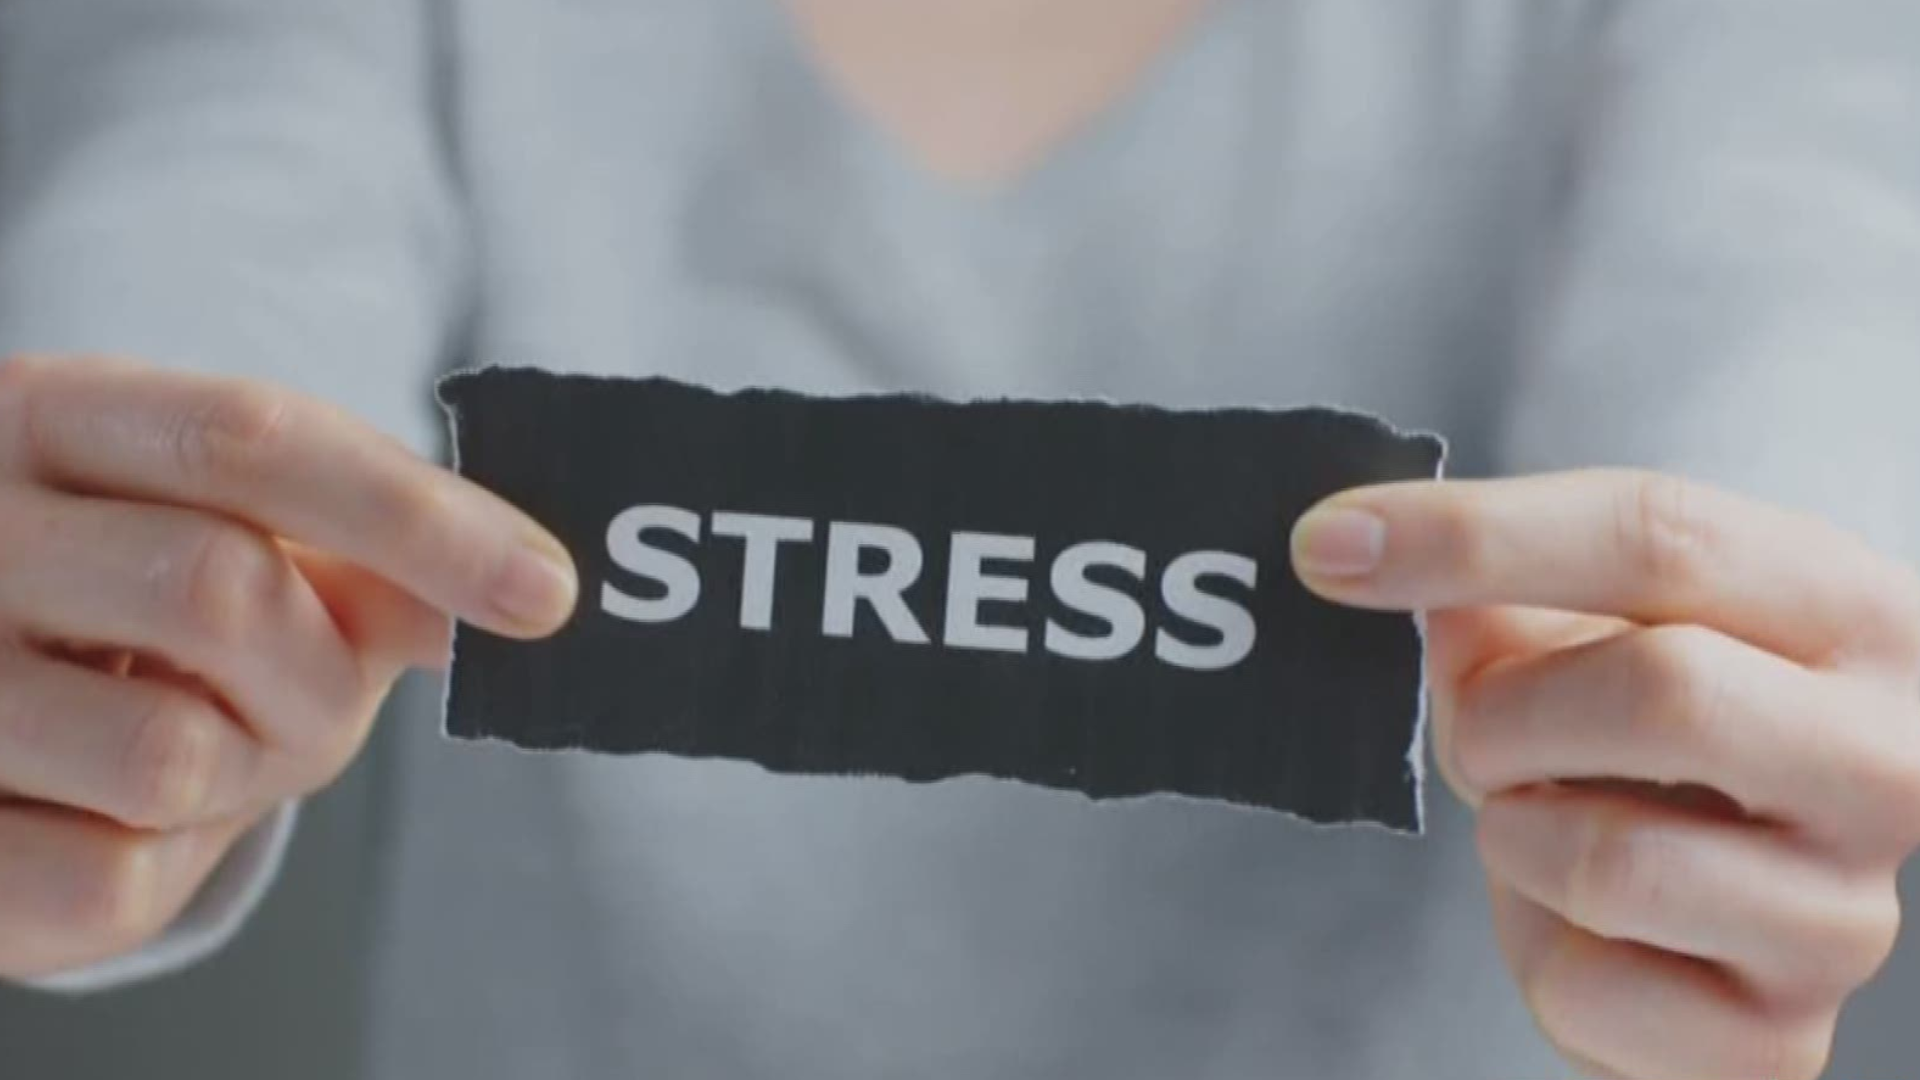 Leslie Draffin sits down with a Temple doctor to learn how stress affects us and how we can help alleviate it.